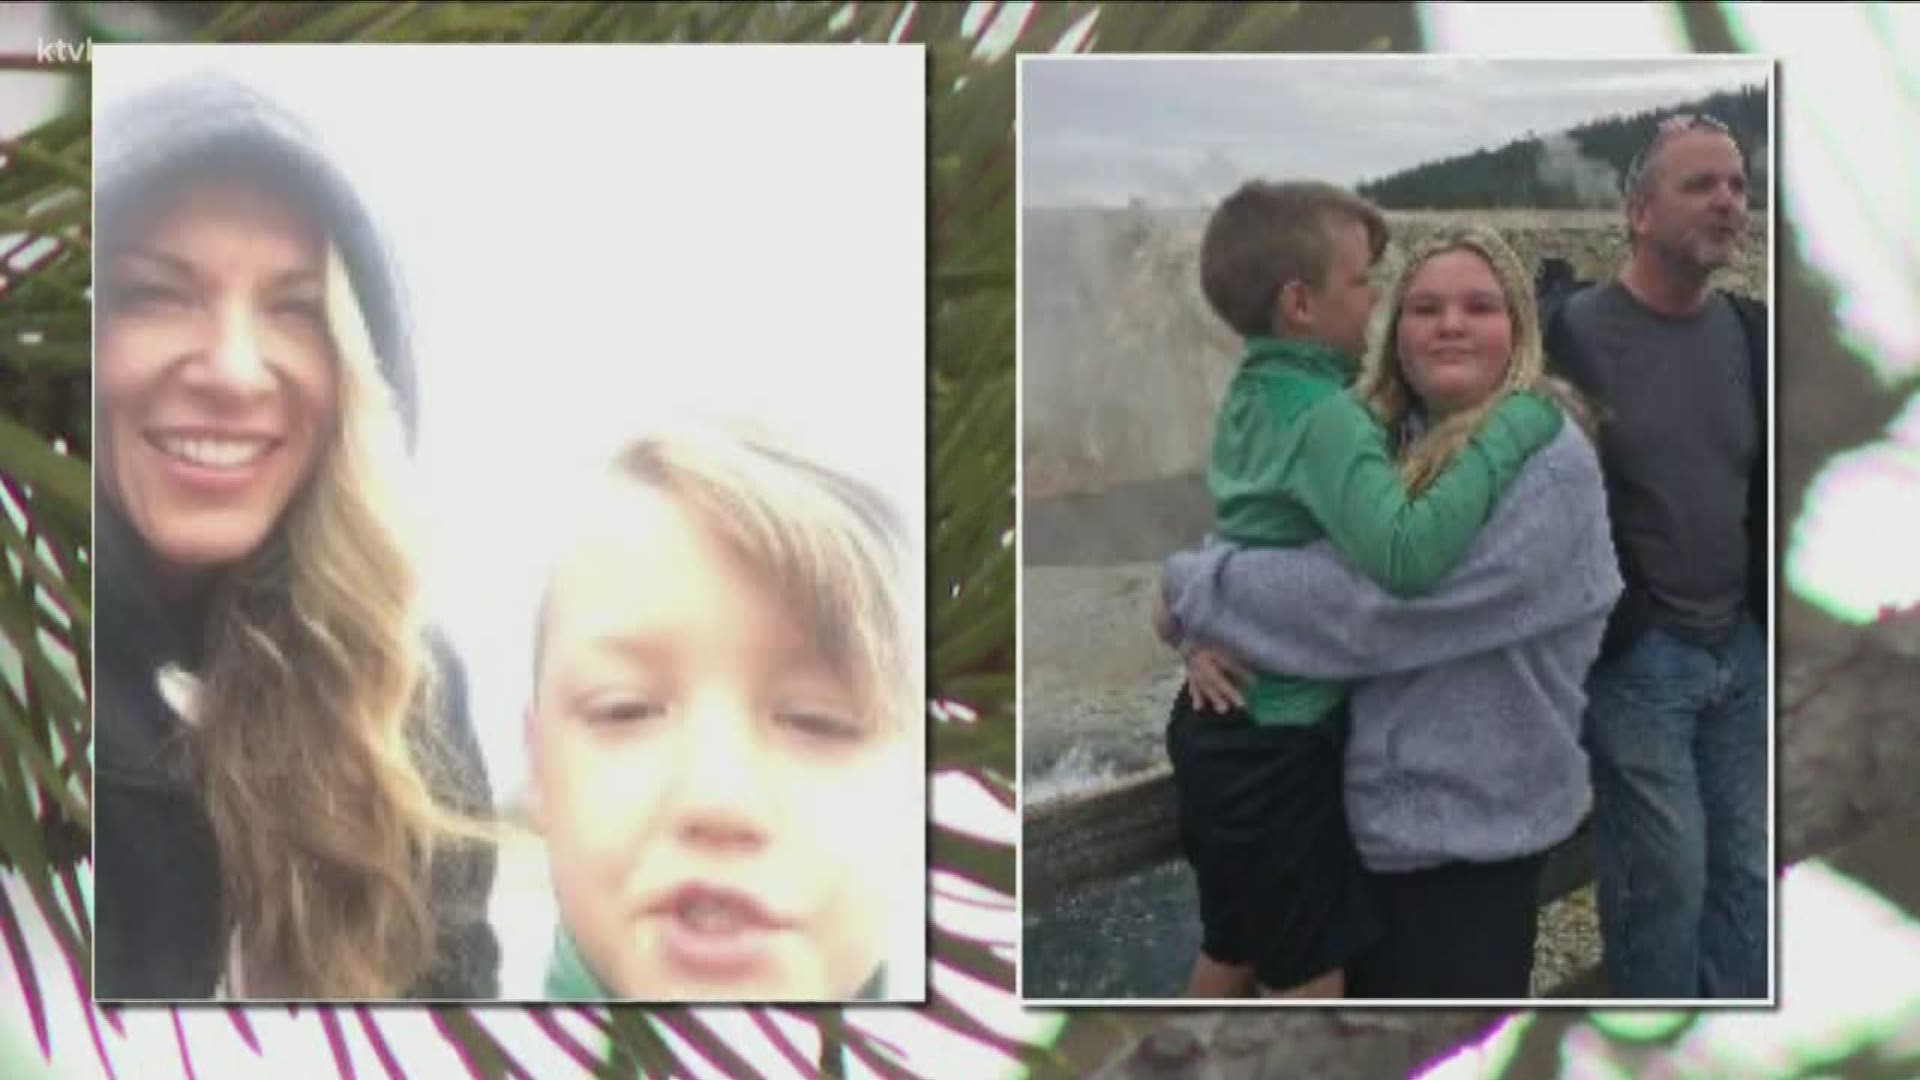 Before JJ Vallow and Tylee Ryan went missing, Lori Vallow took the children to Yellowstone on Sept. 8.